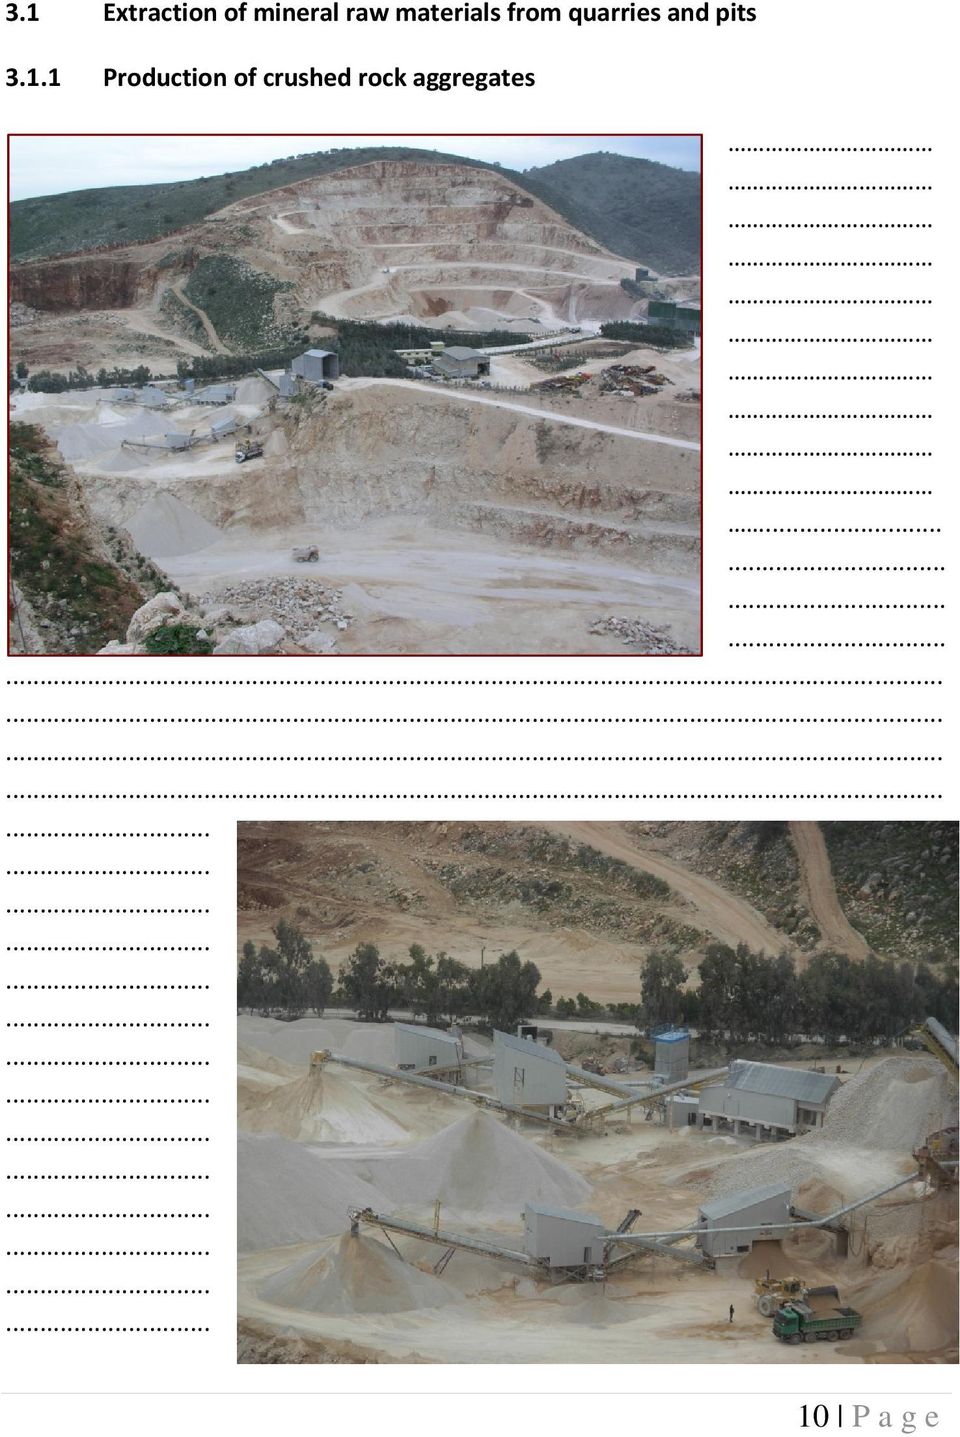 1 Production of crushed rock aggregates.